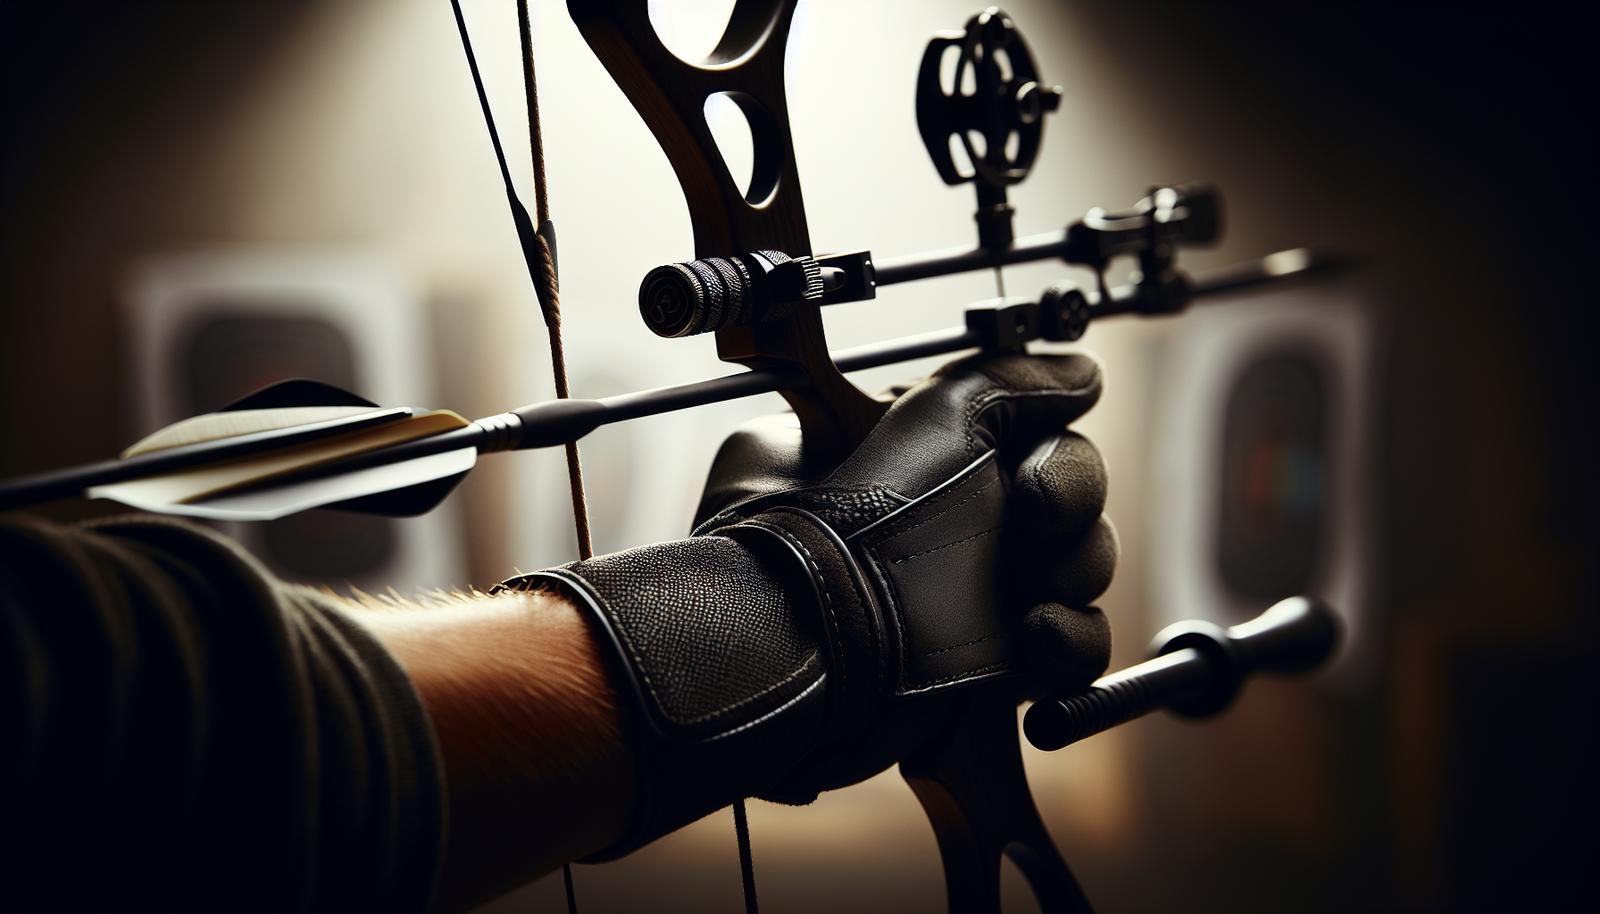 Top 5 Tips For Improving Your Archery Skills